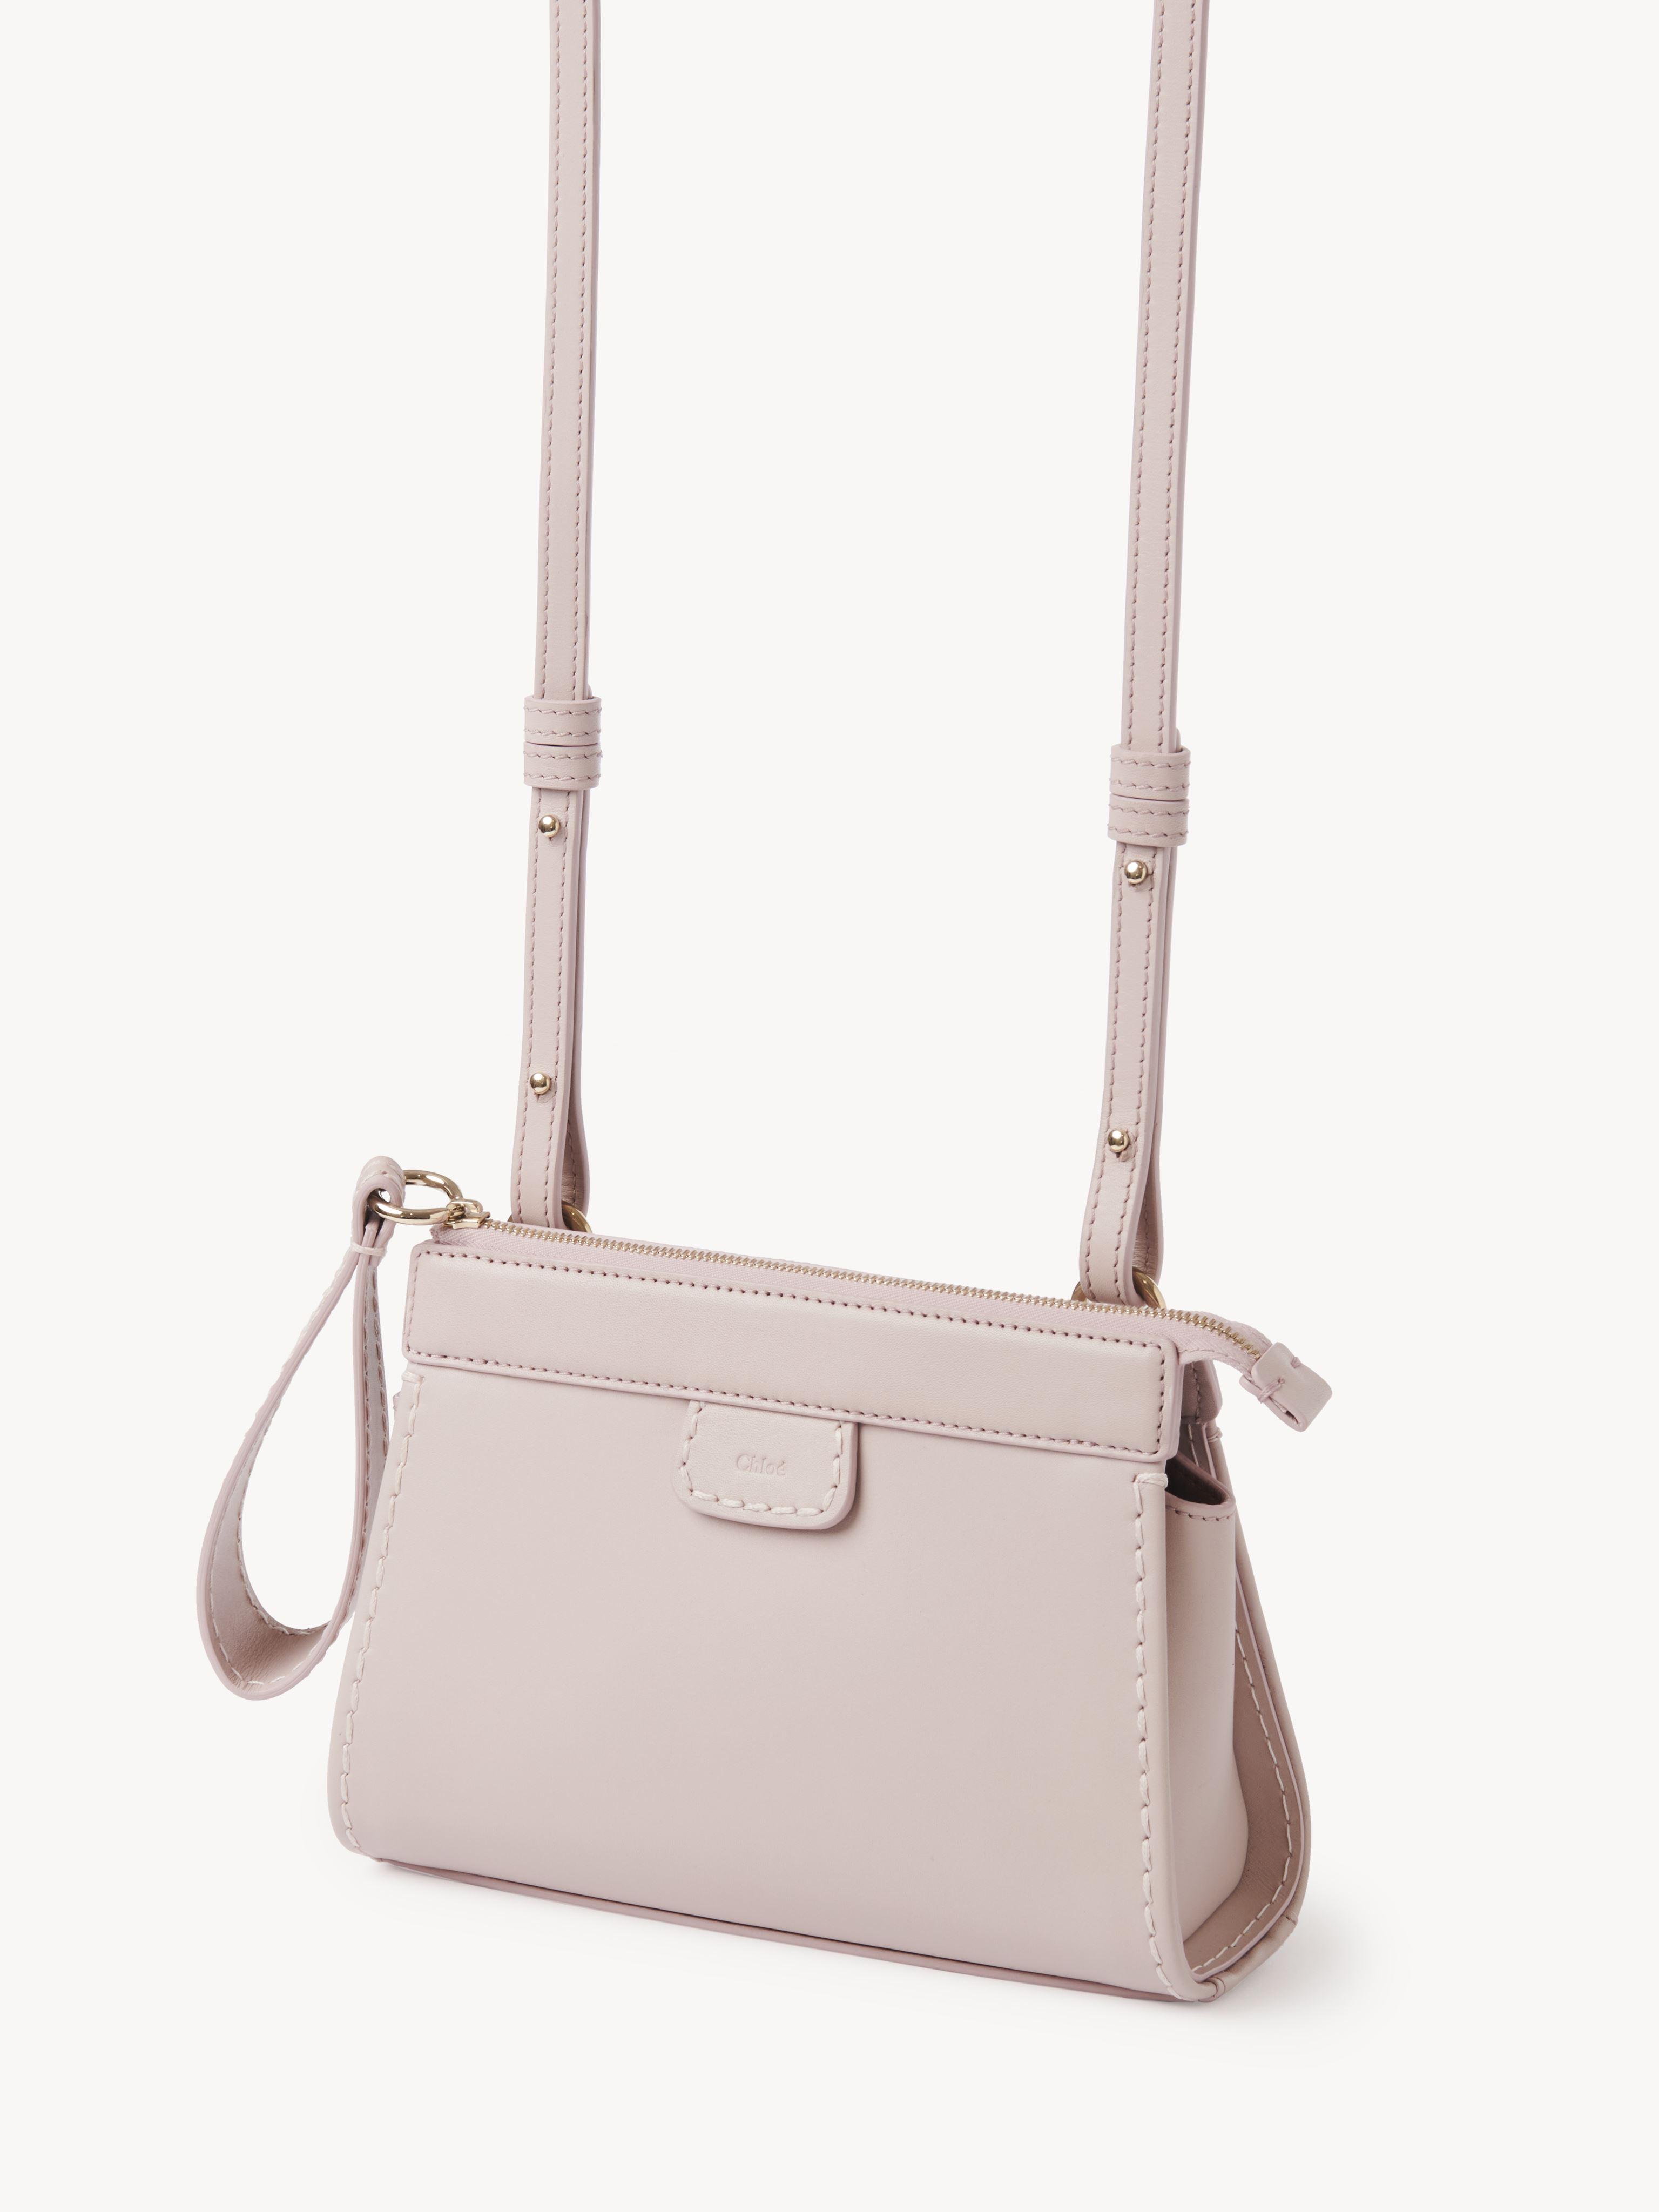 Chloé Edith Small Pouch in Natural